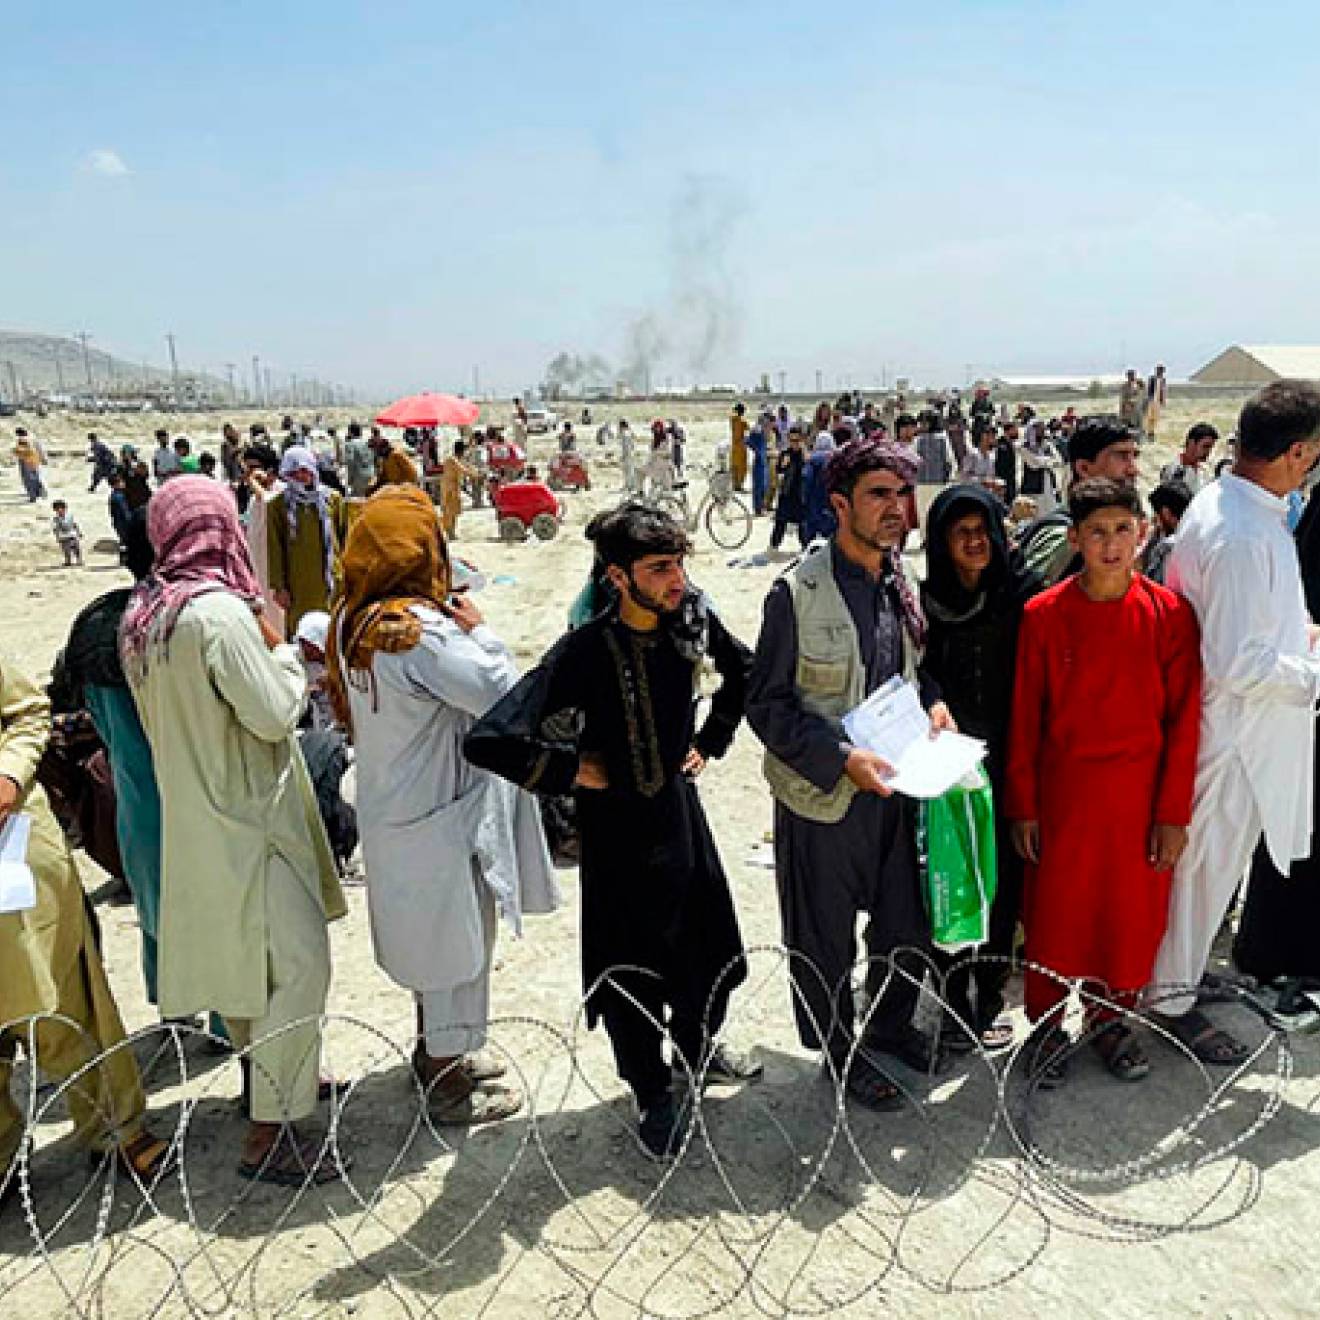 People gathered outside the airport in Kabul